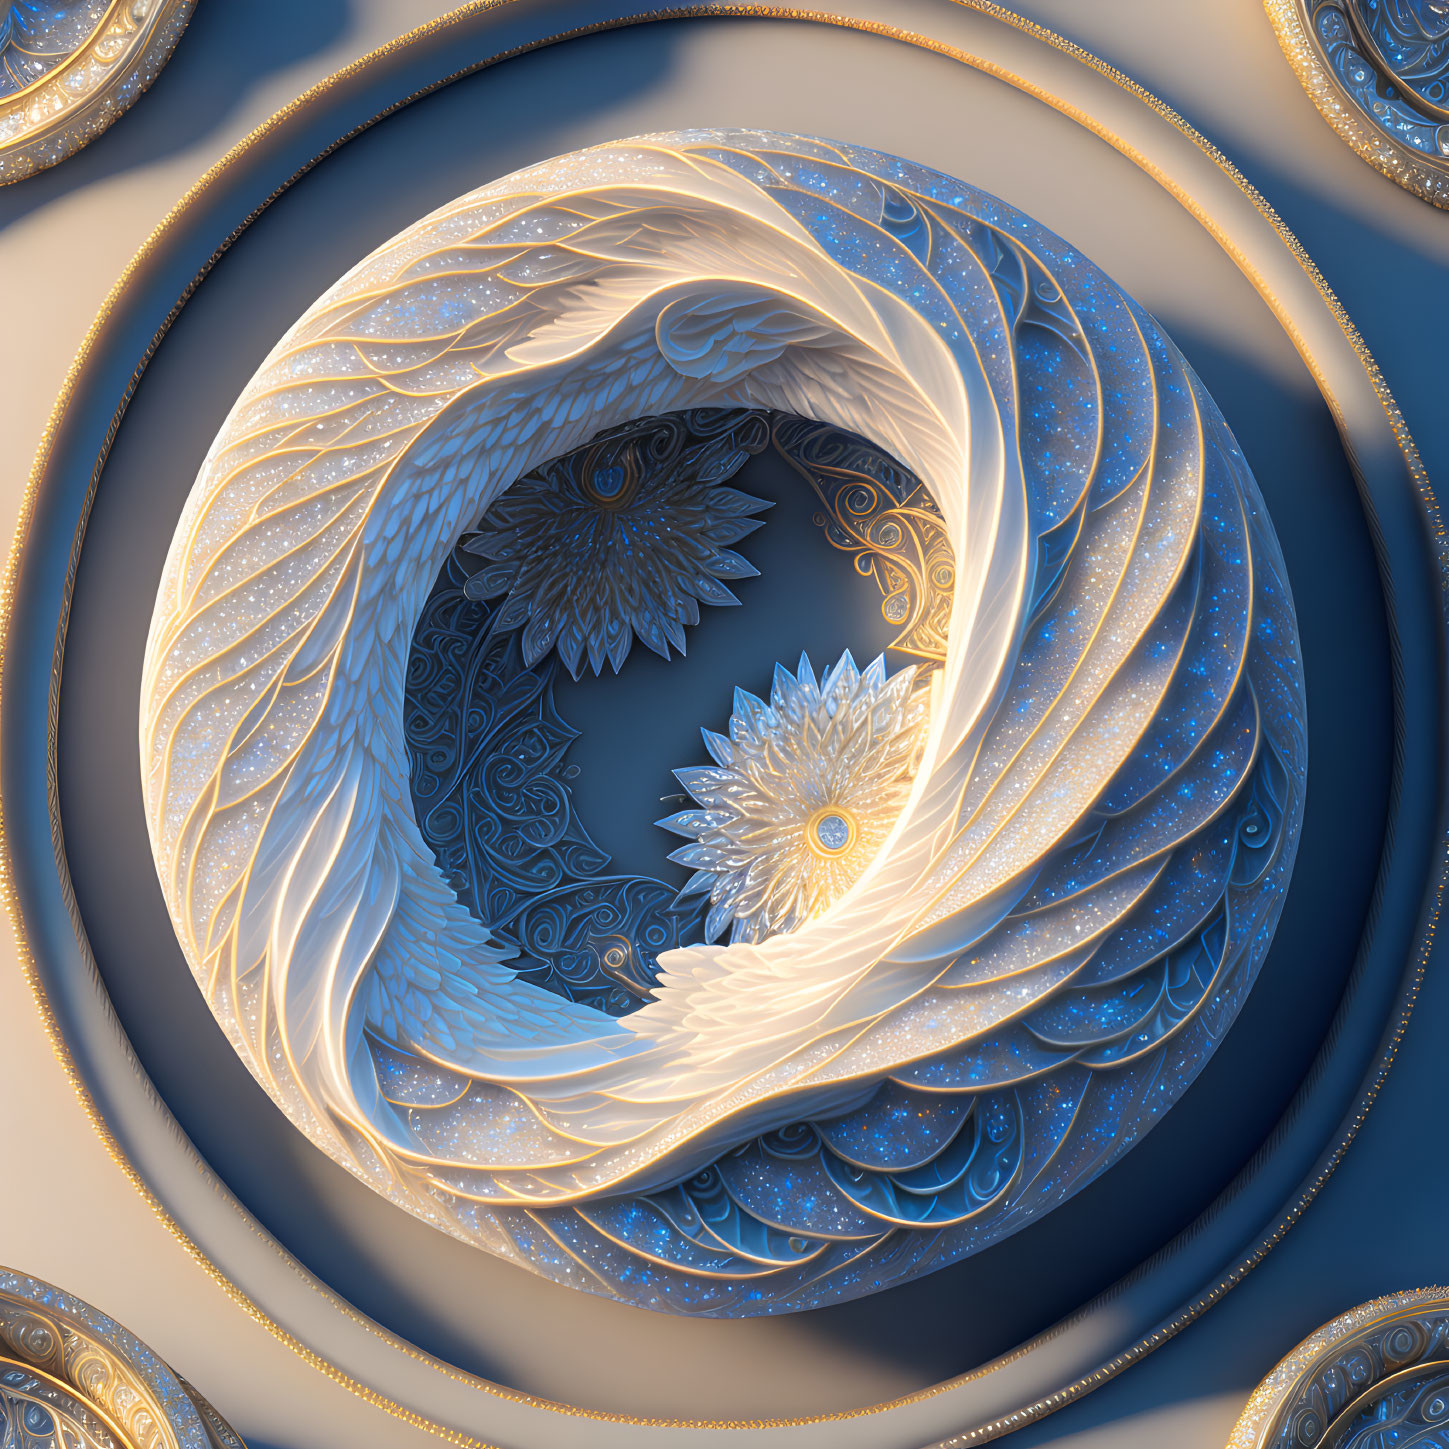 Intricate Fractal Design: Spiraling Shell with Ornate Patterns